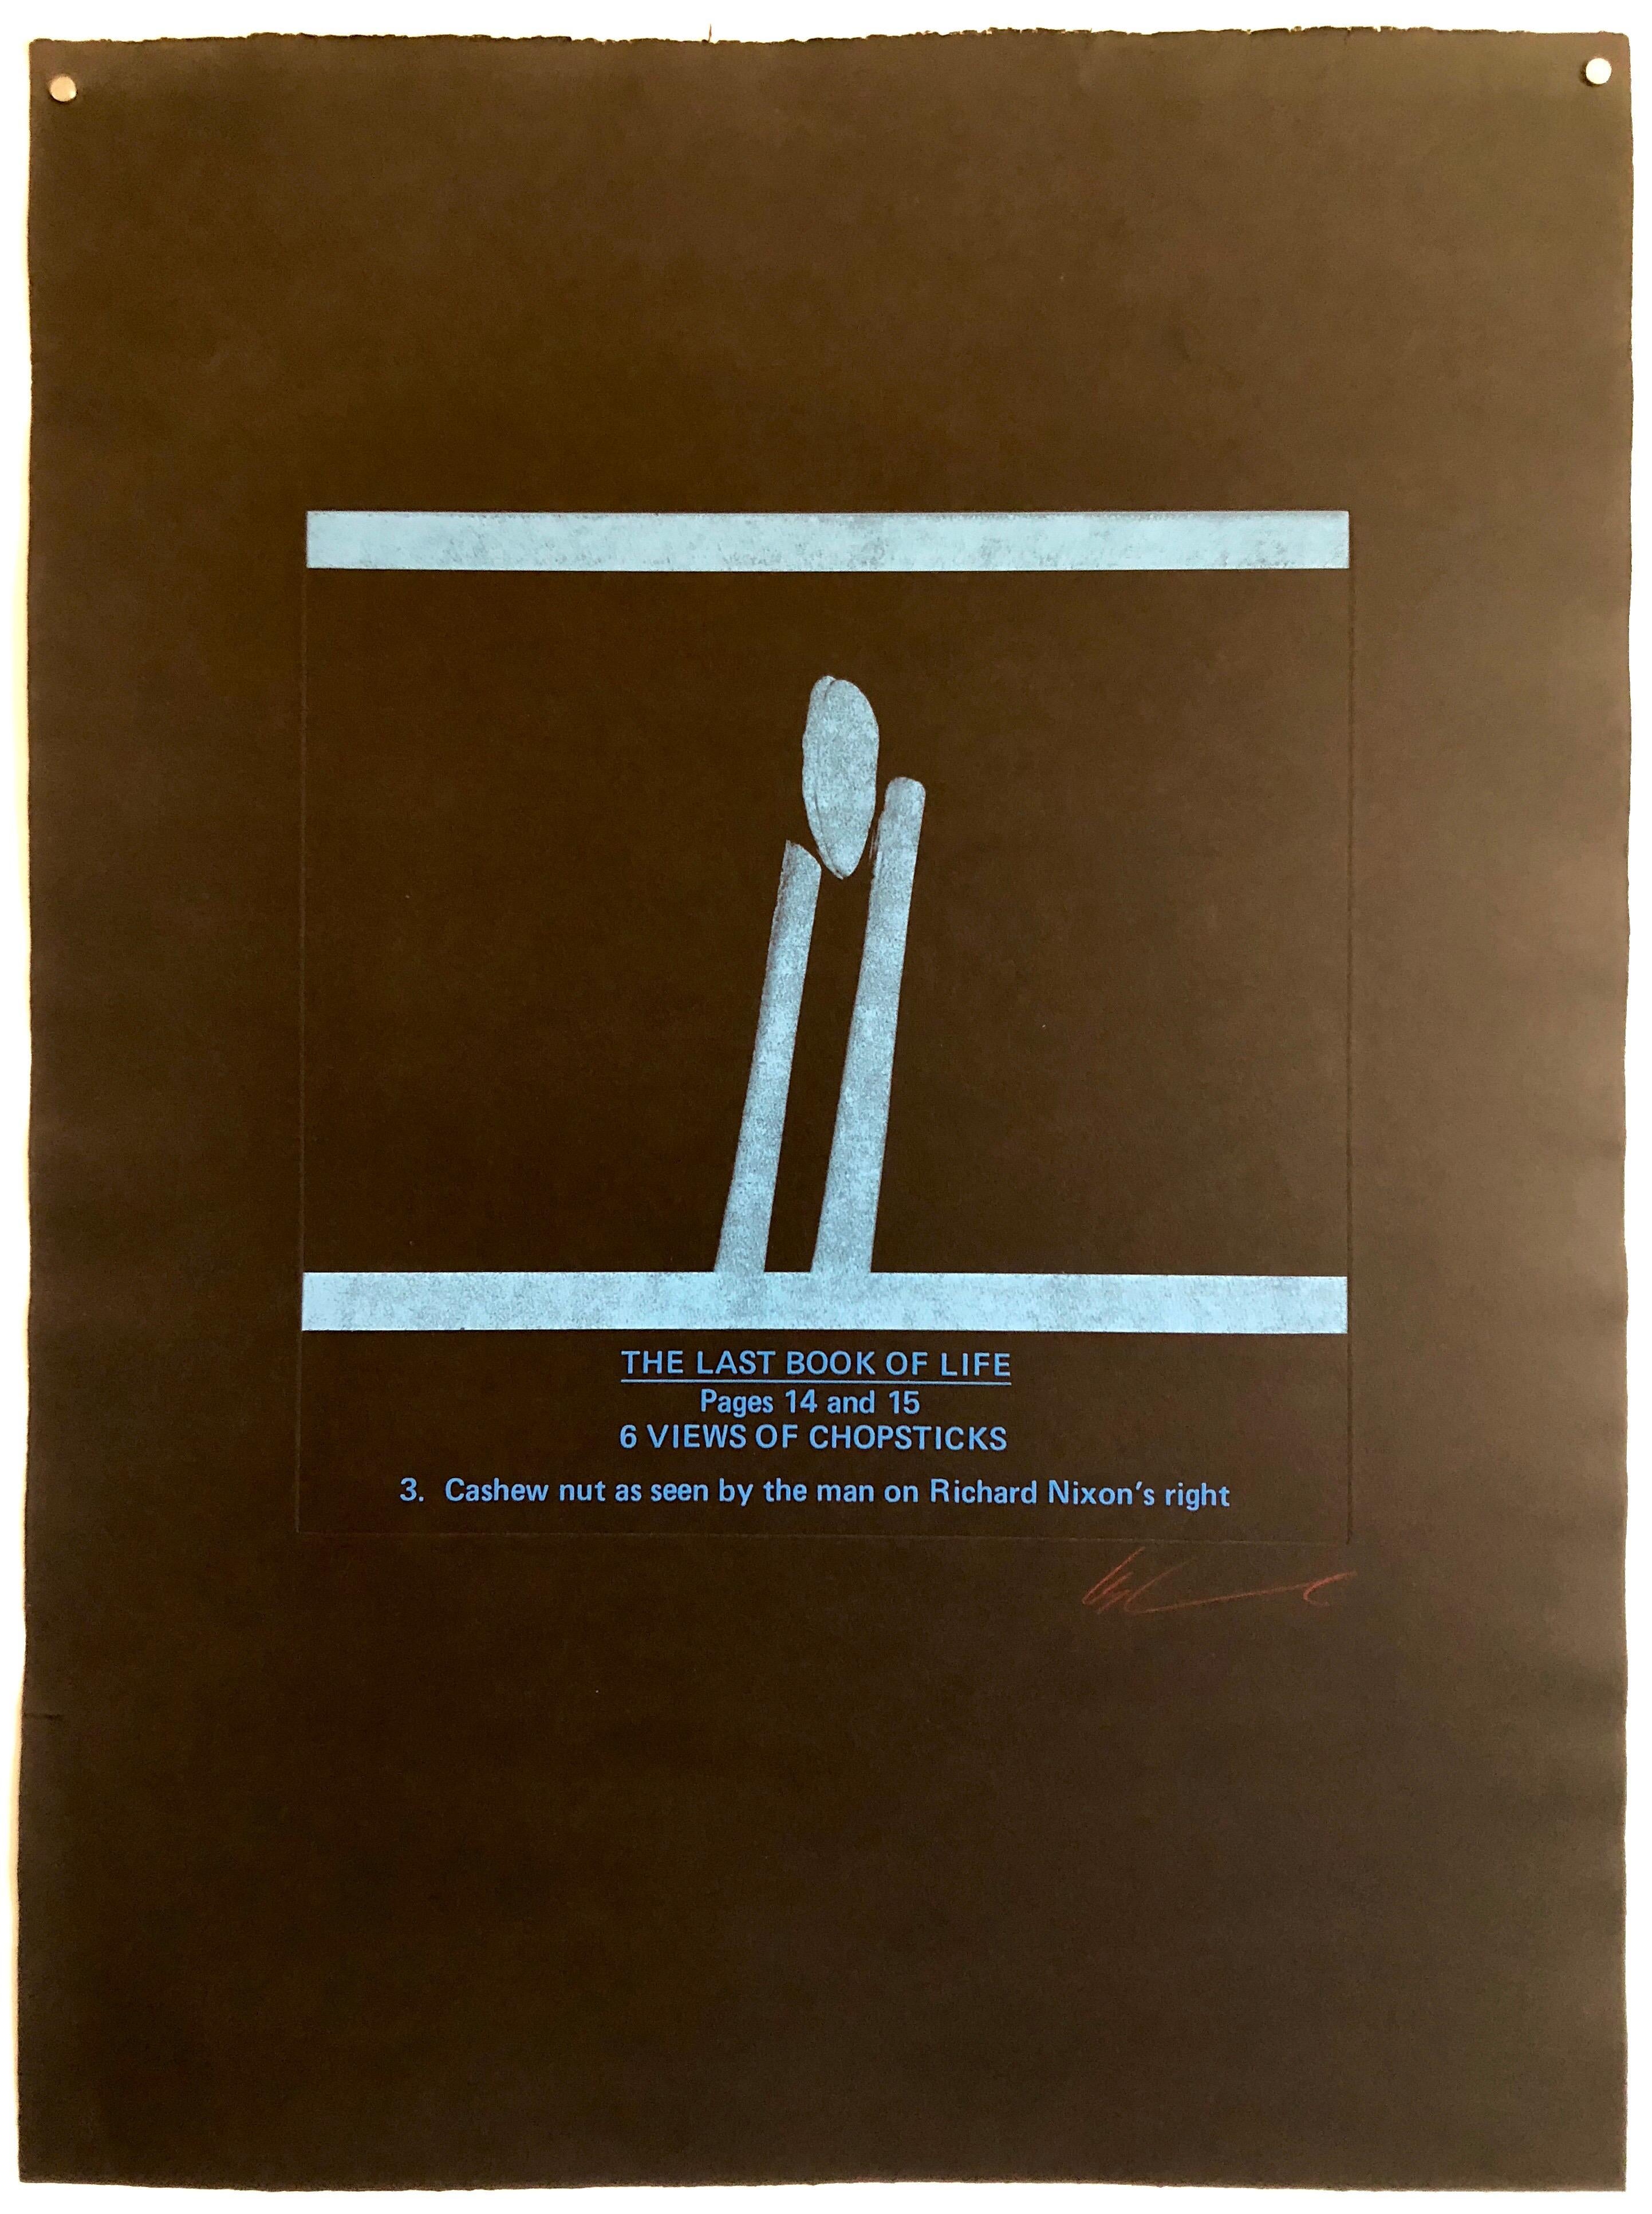 Last Book of Life. Richard Nixon’s view of Chou En Lai’s chopsticks  
Photograph etchings
Printed on Stonehedge black paper
Hand signed, and numbered, by Levine in red pencil along the lower margin. 
A fine impression and in good condition